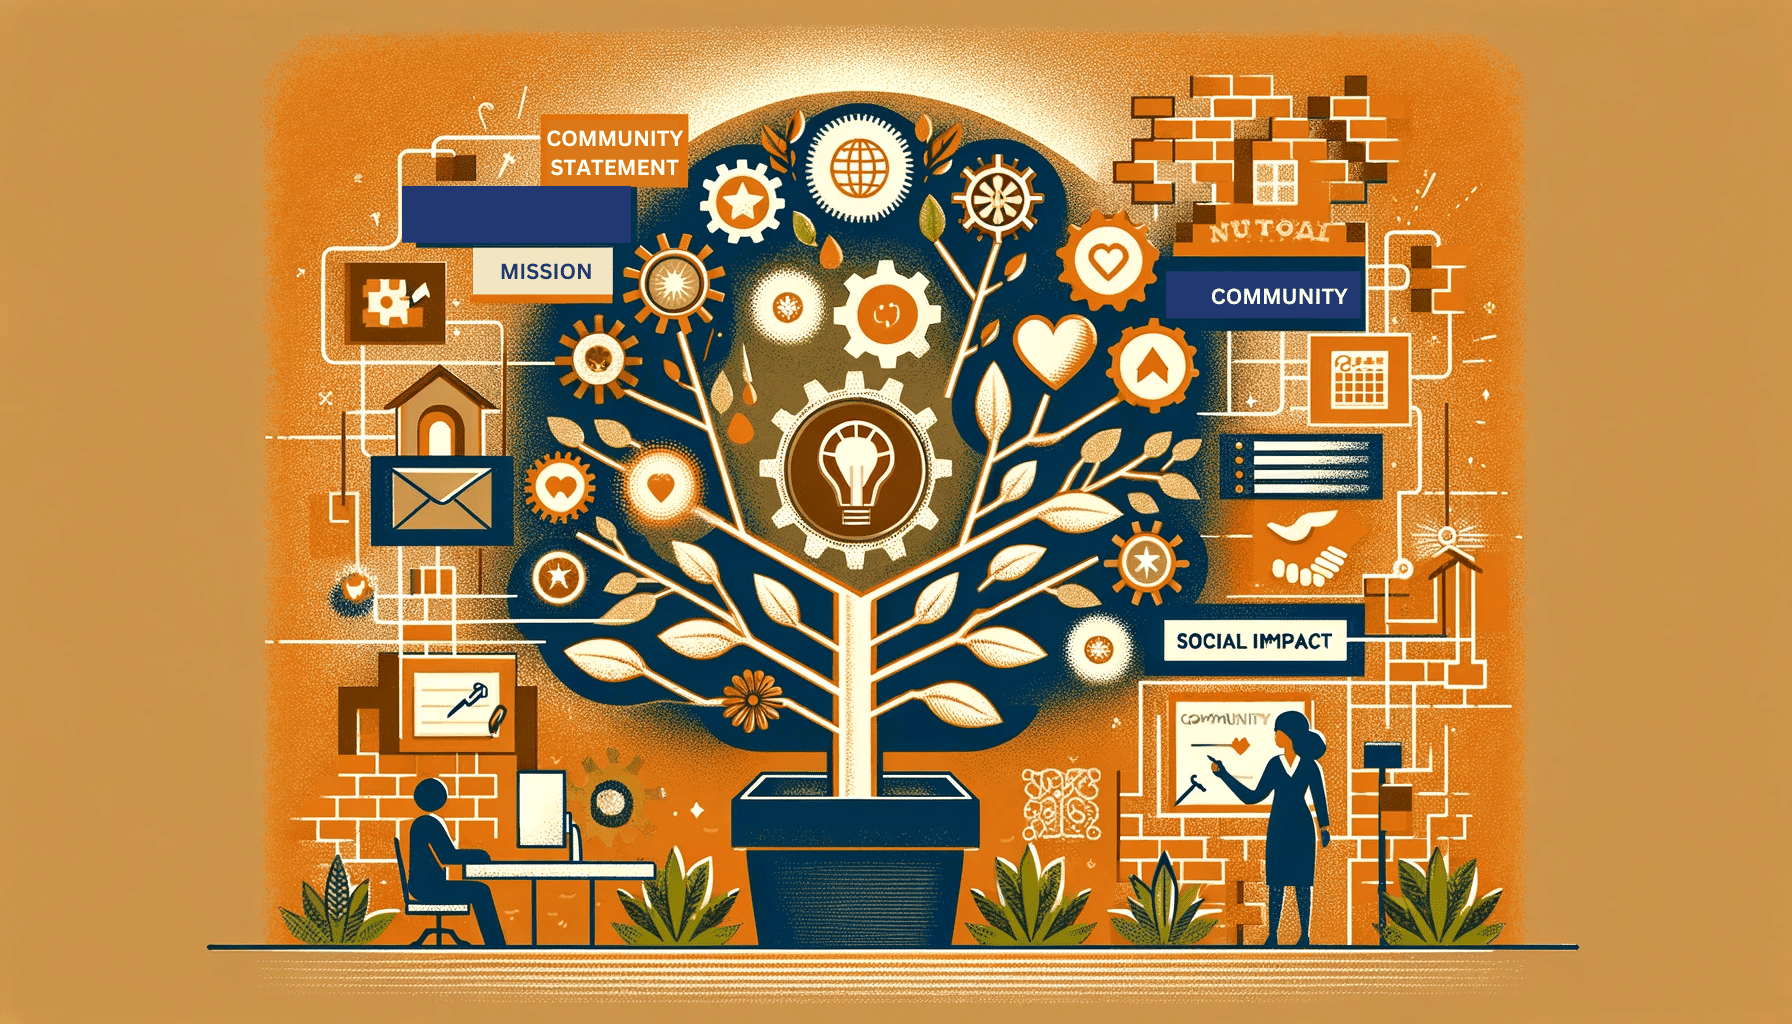 An illustration of a tree adorned with a variety of icons representing different nonprofit organizations.